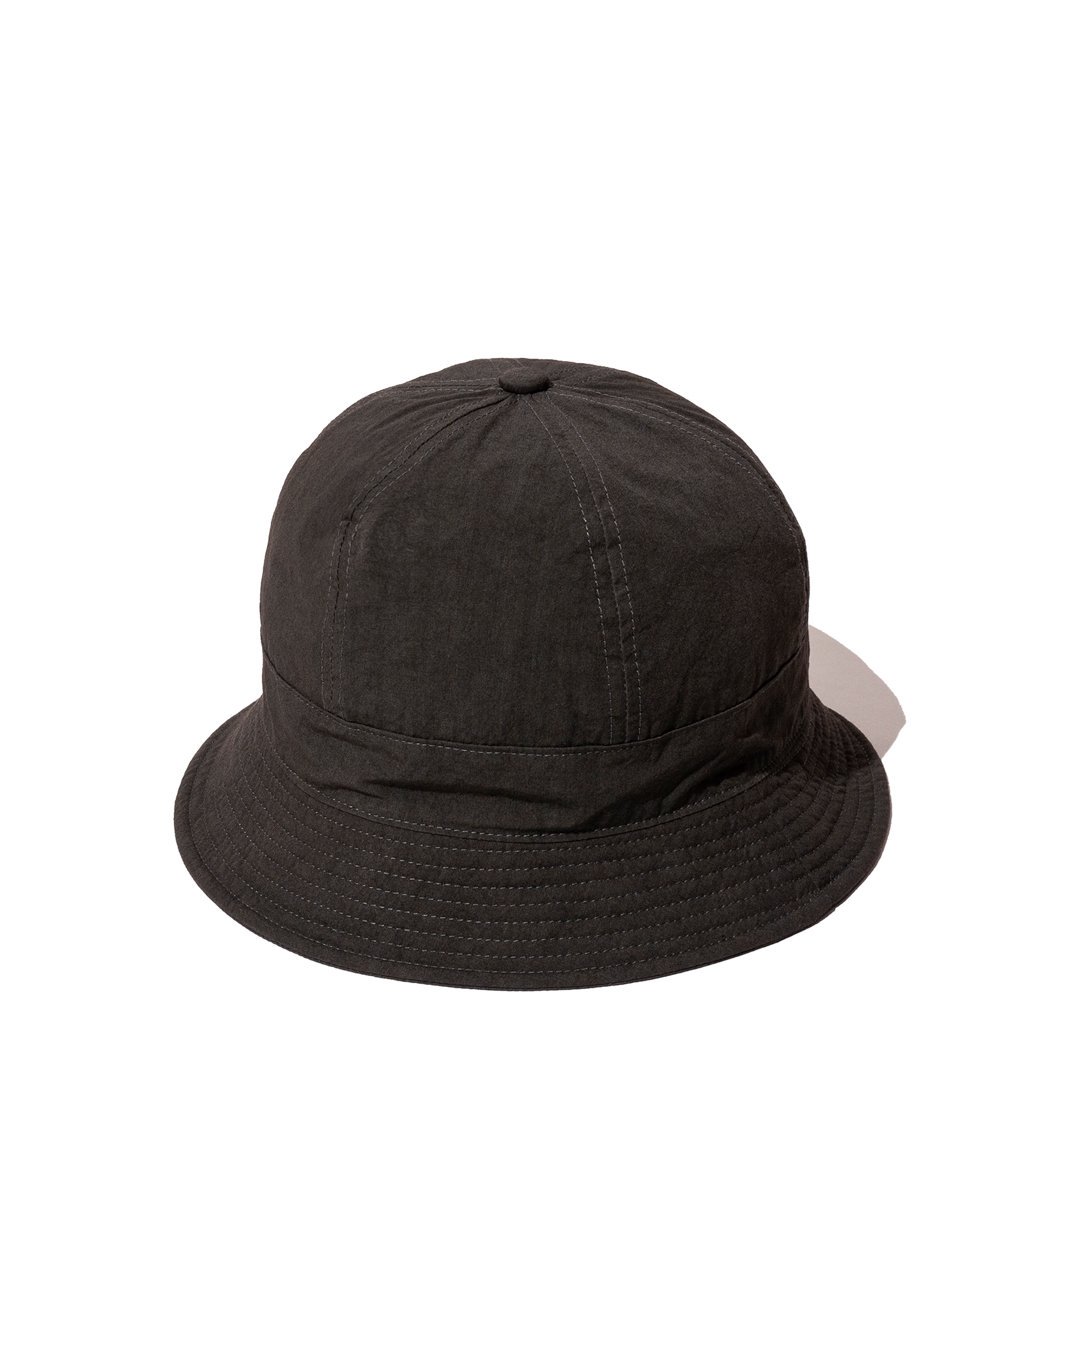 DeMarcoLabDRY NYCO BELL HAT